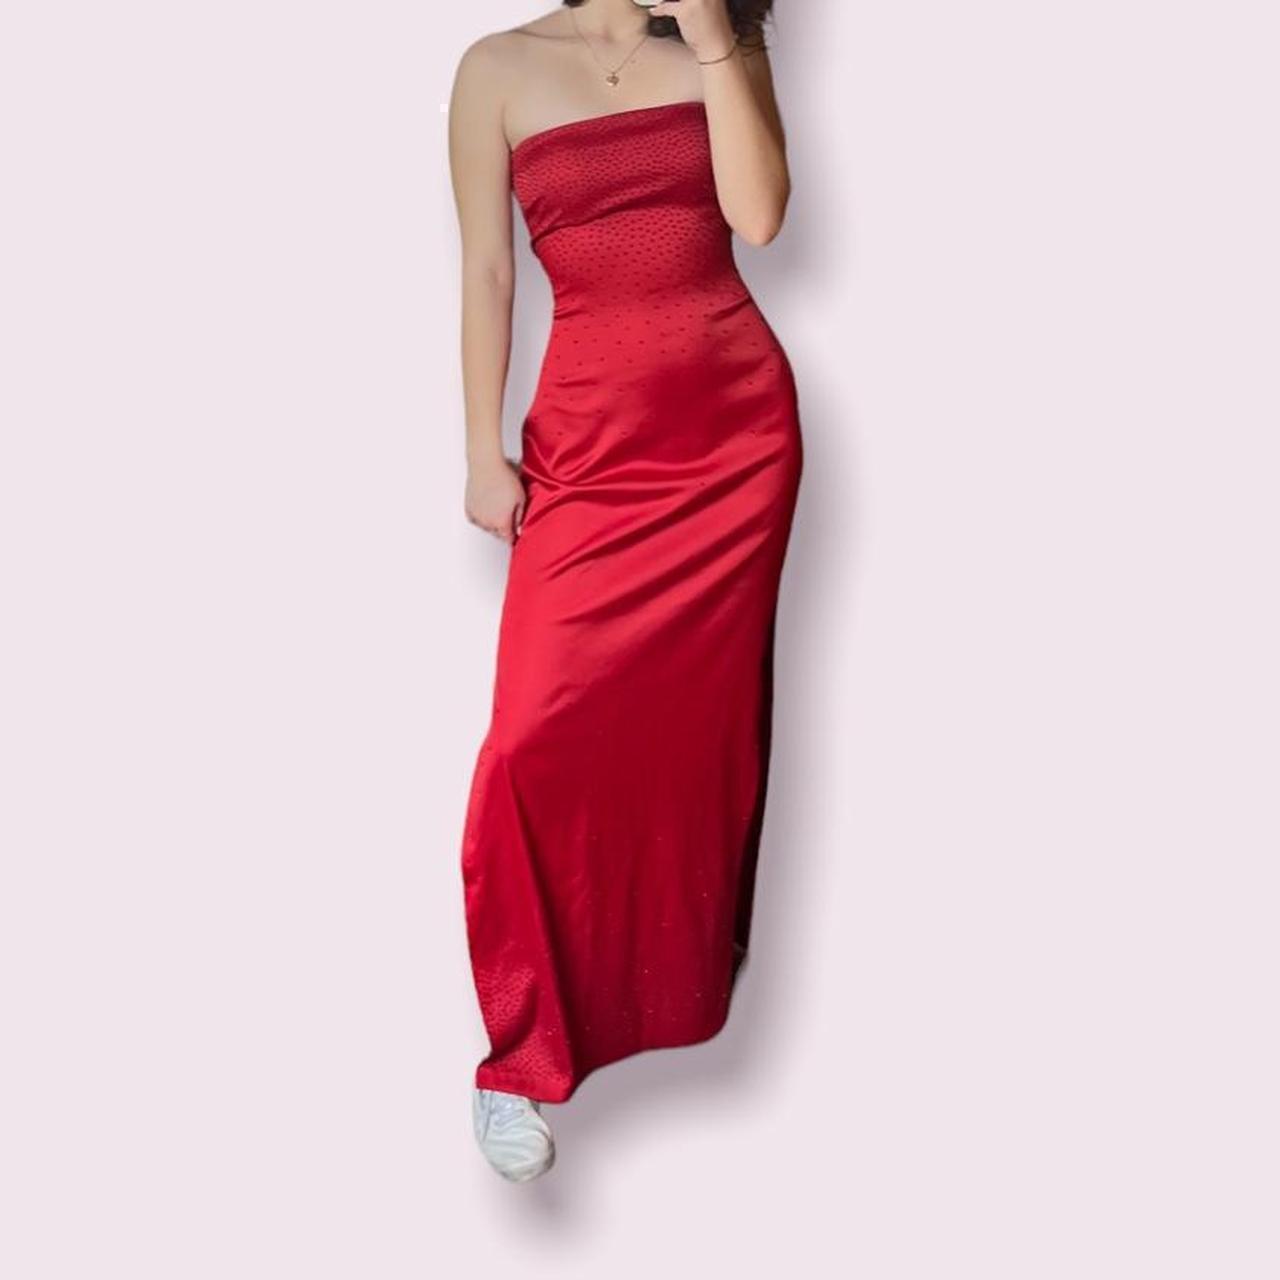 Product Image 3 - Red strapless prom dress. This